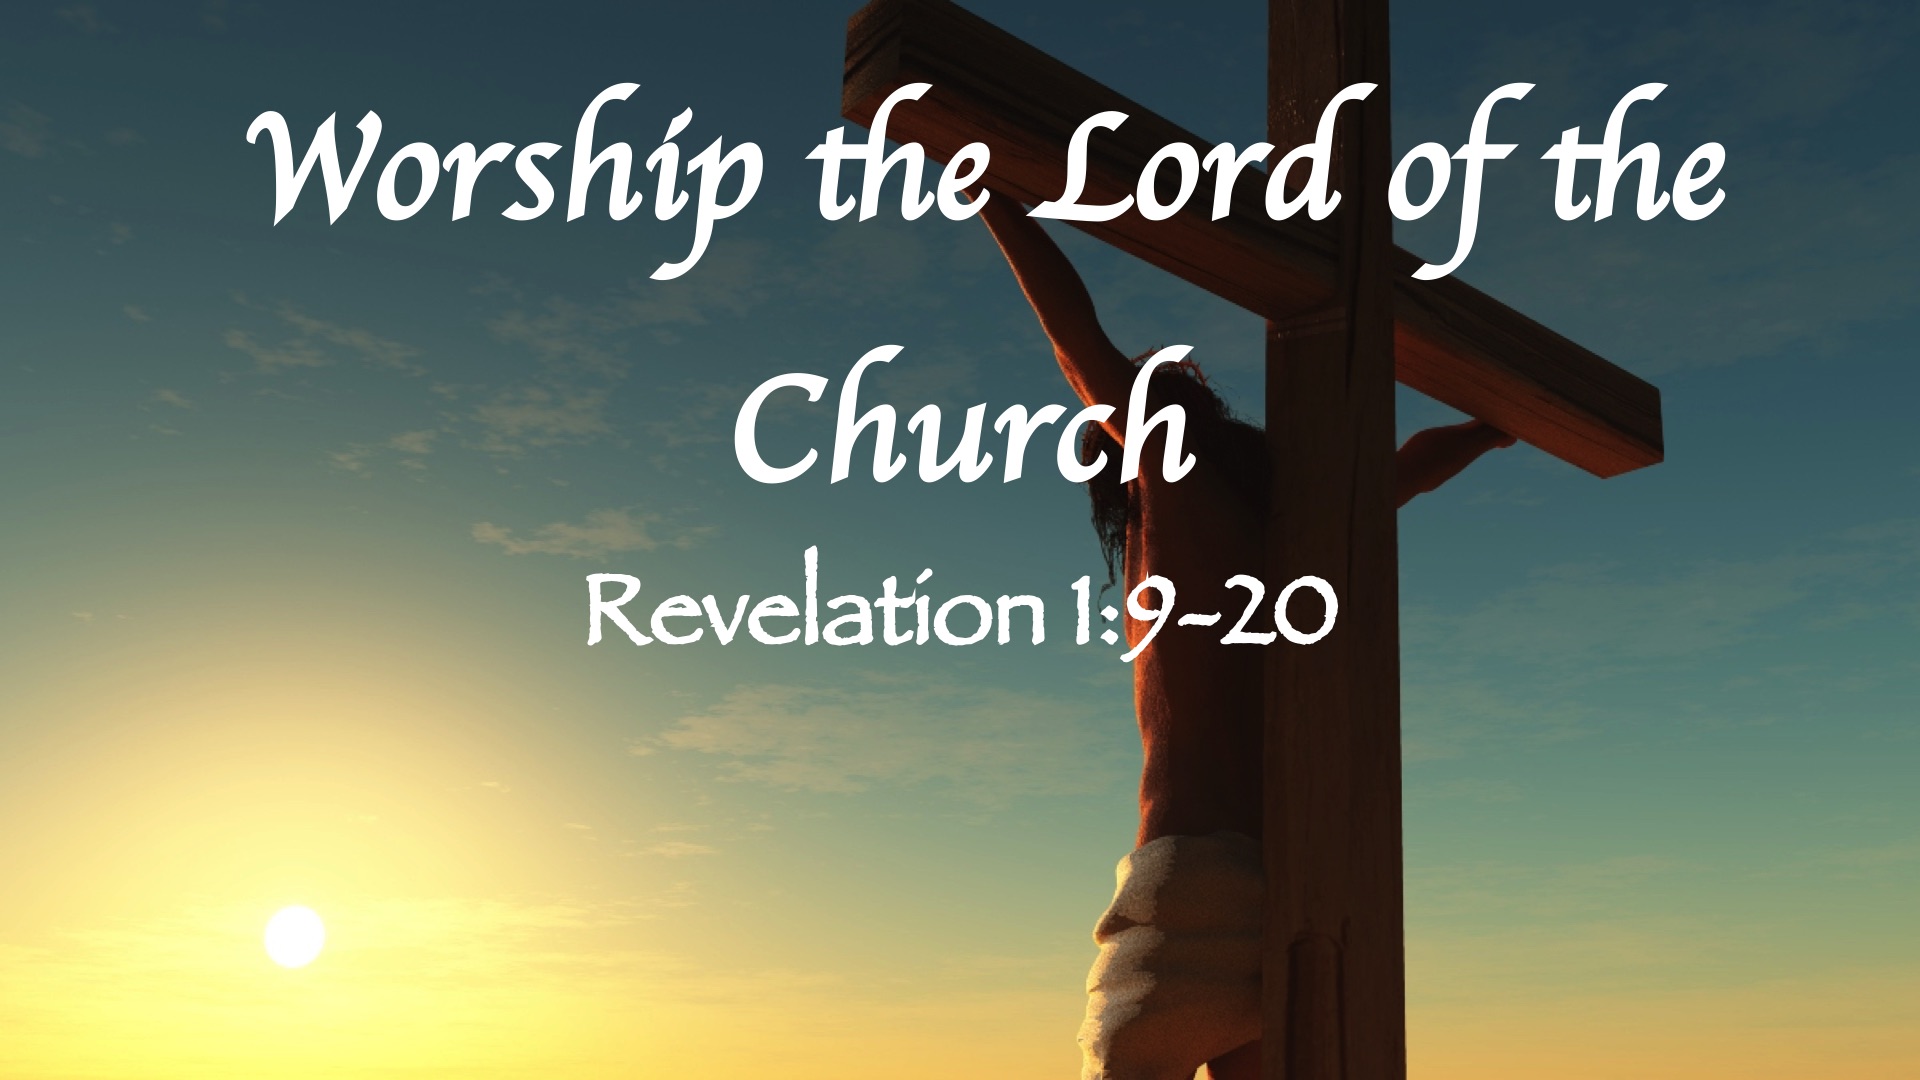 The Book of Revelation: Worship the Lord of the Church